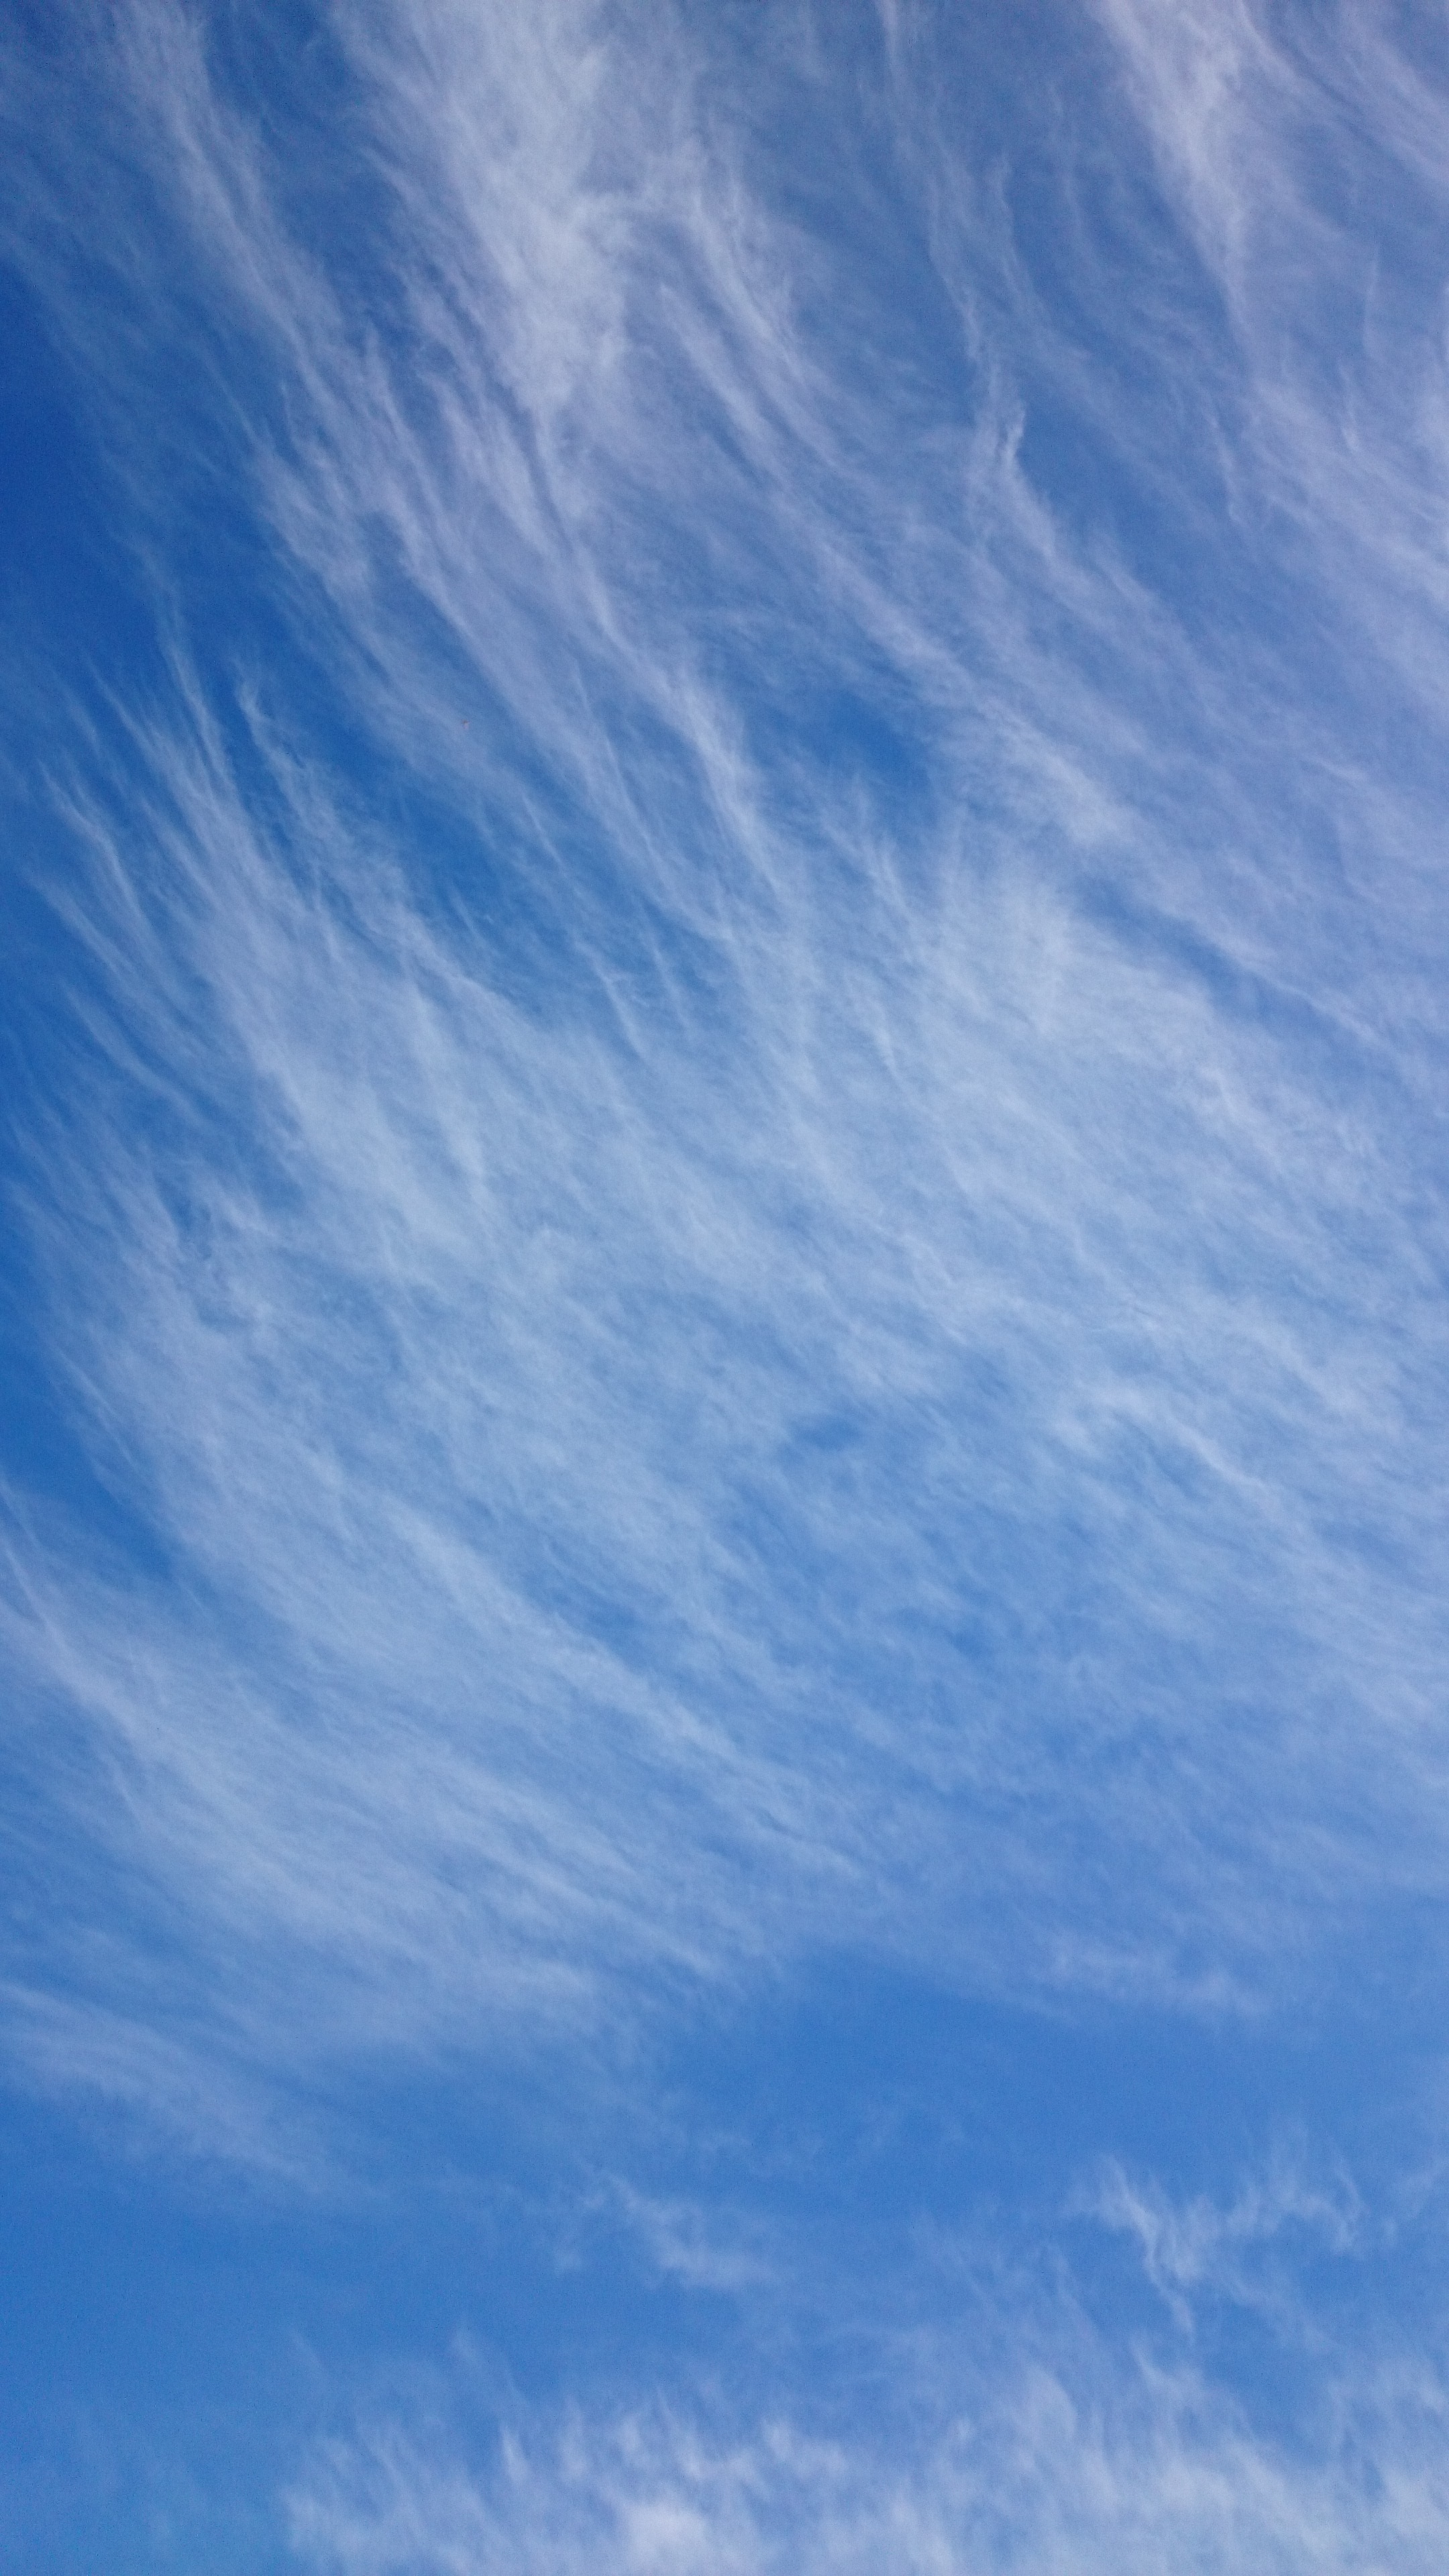 Blue Sky weather free image download